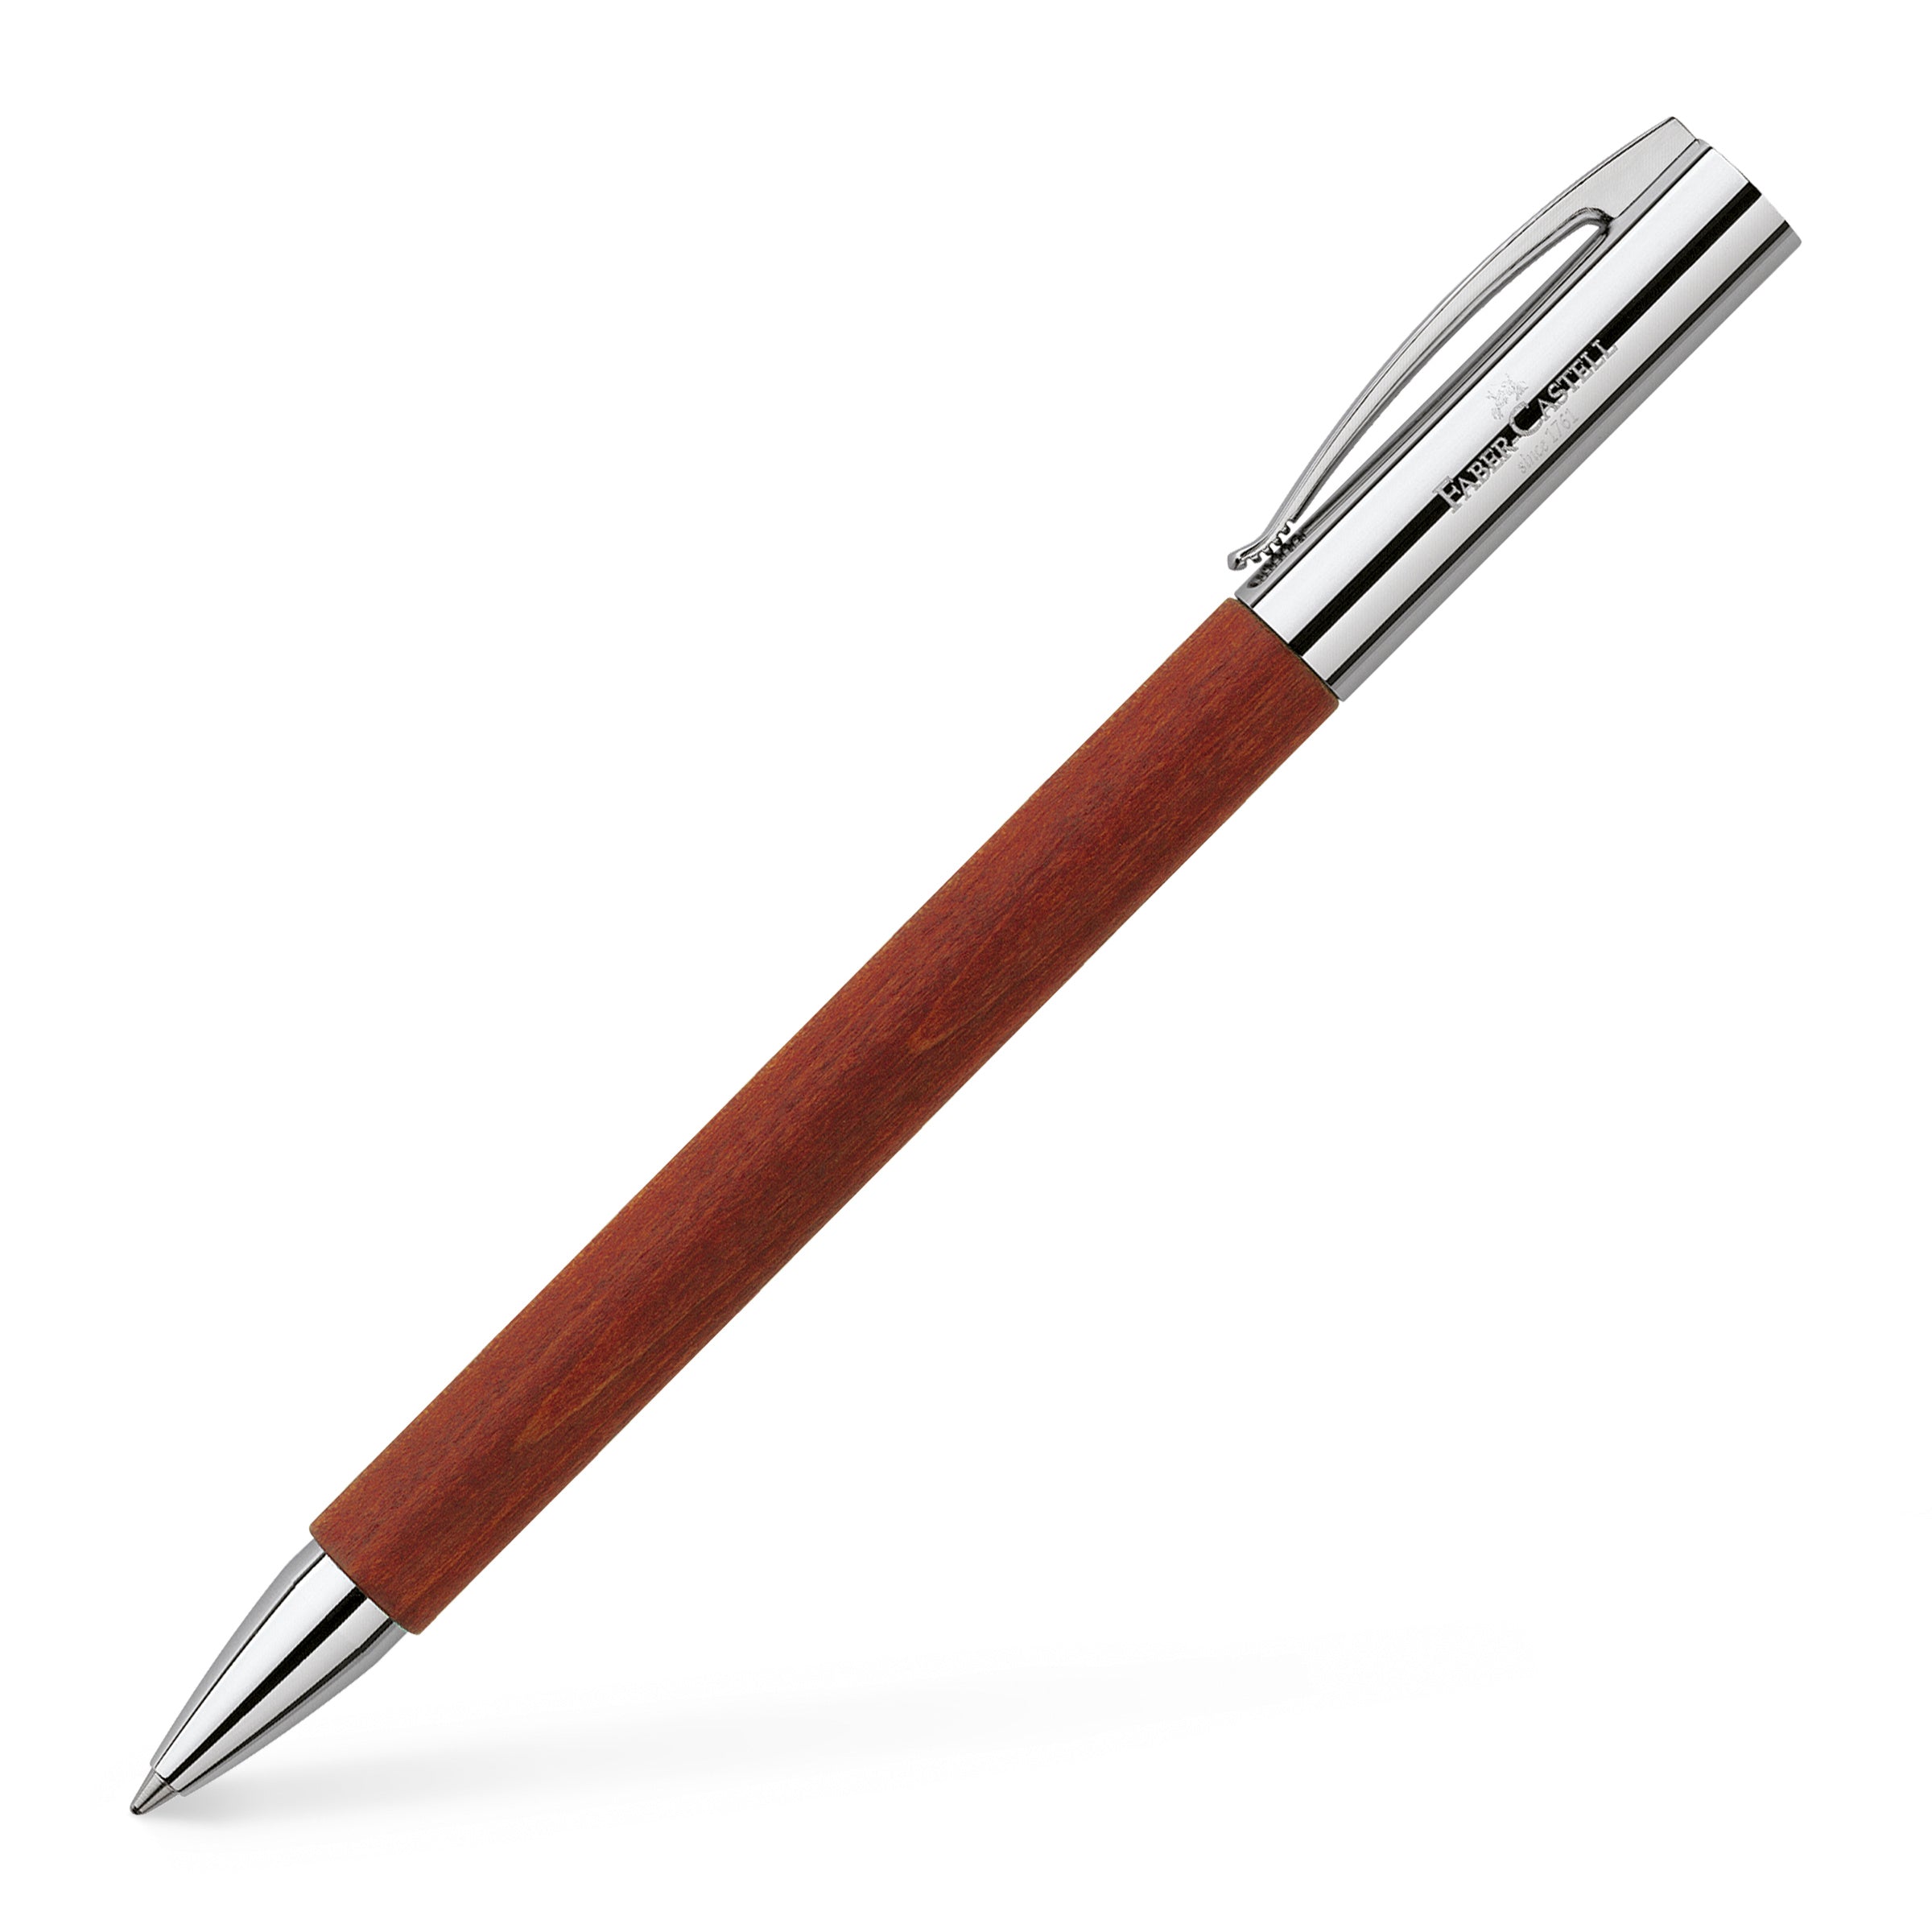 Fabster-call Ambition Ballpoint Pen Pearwood